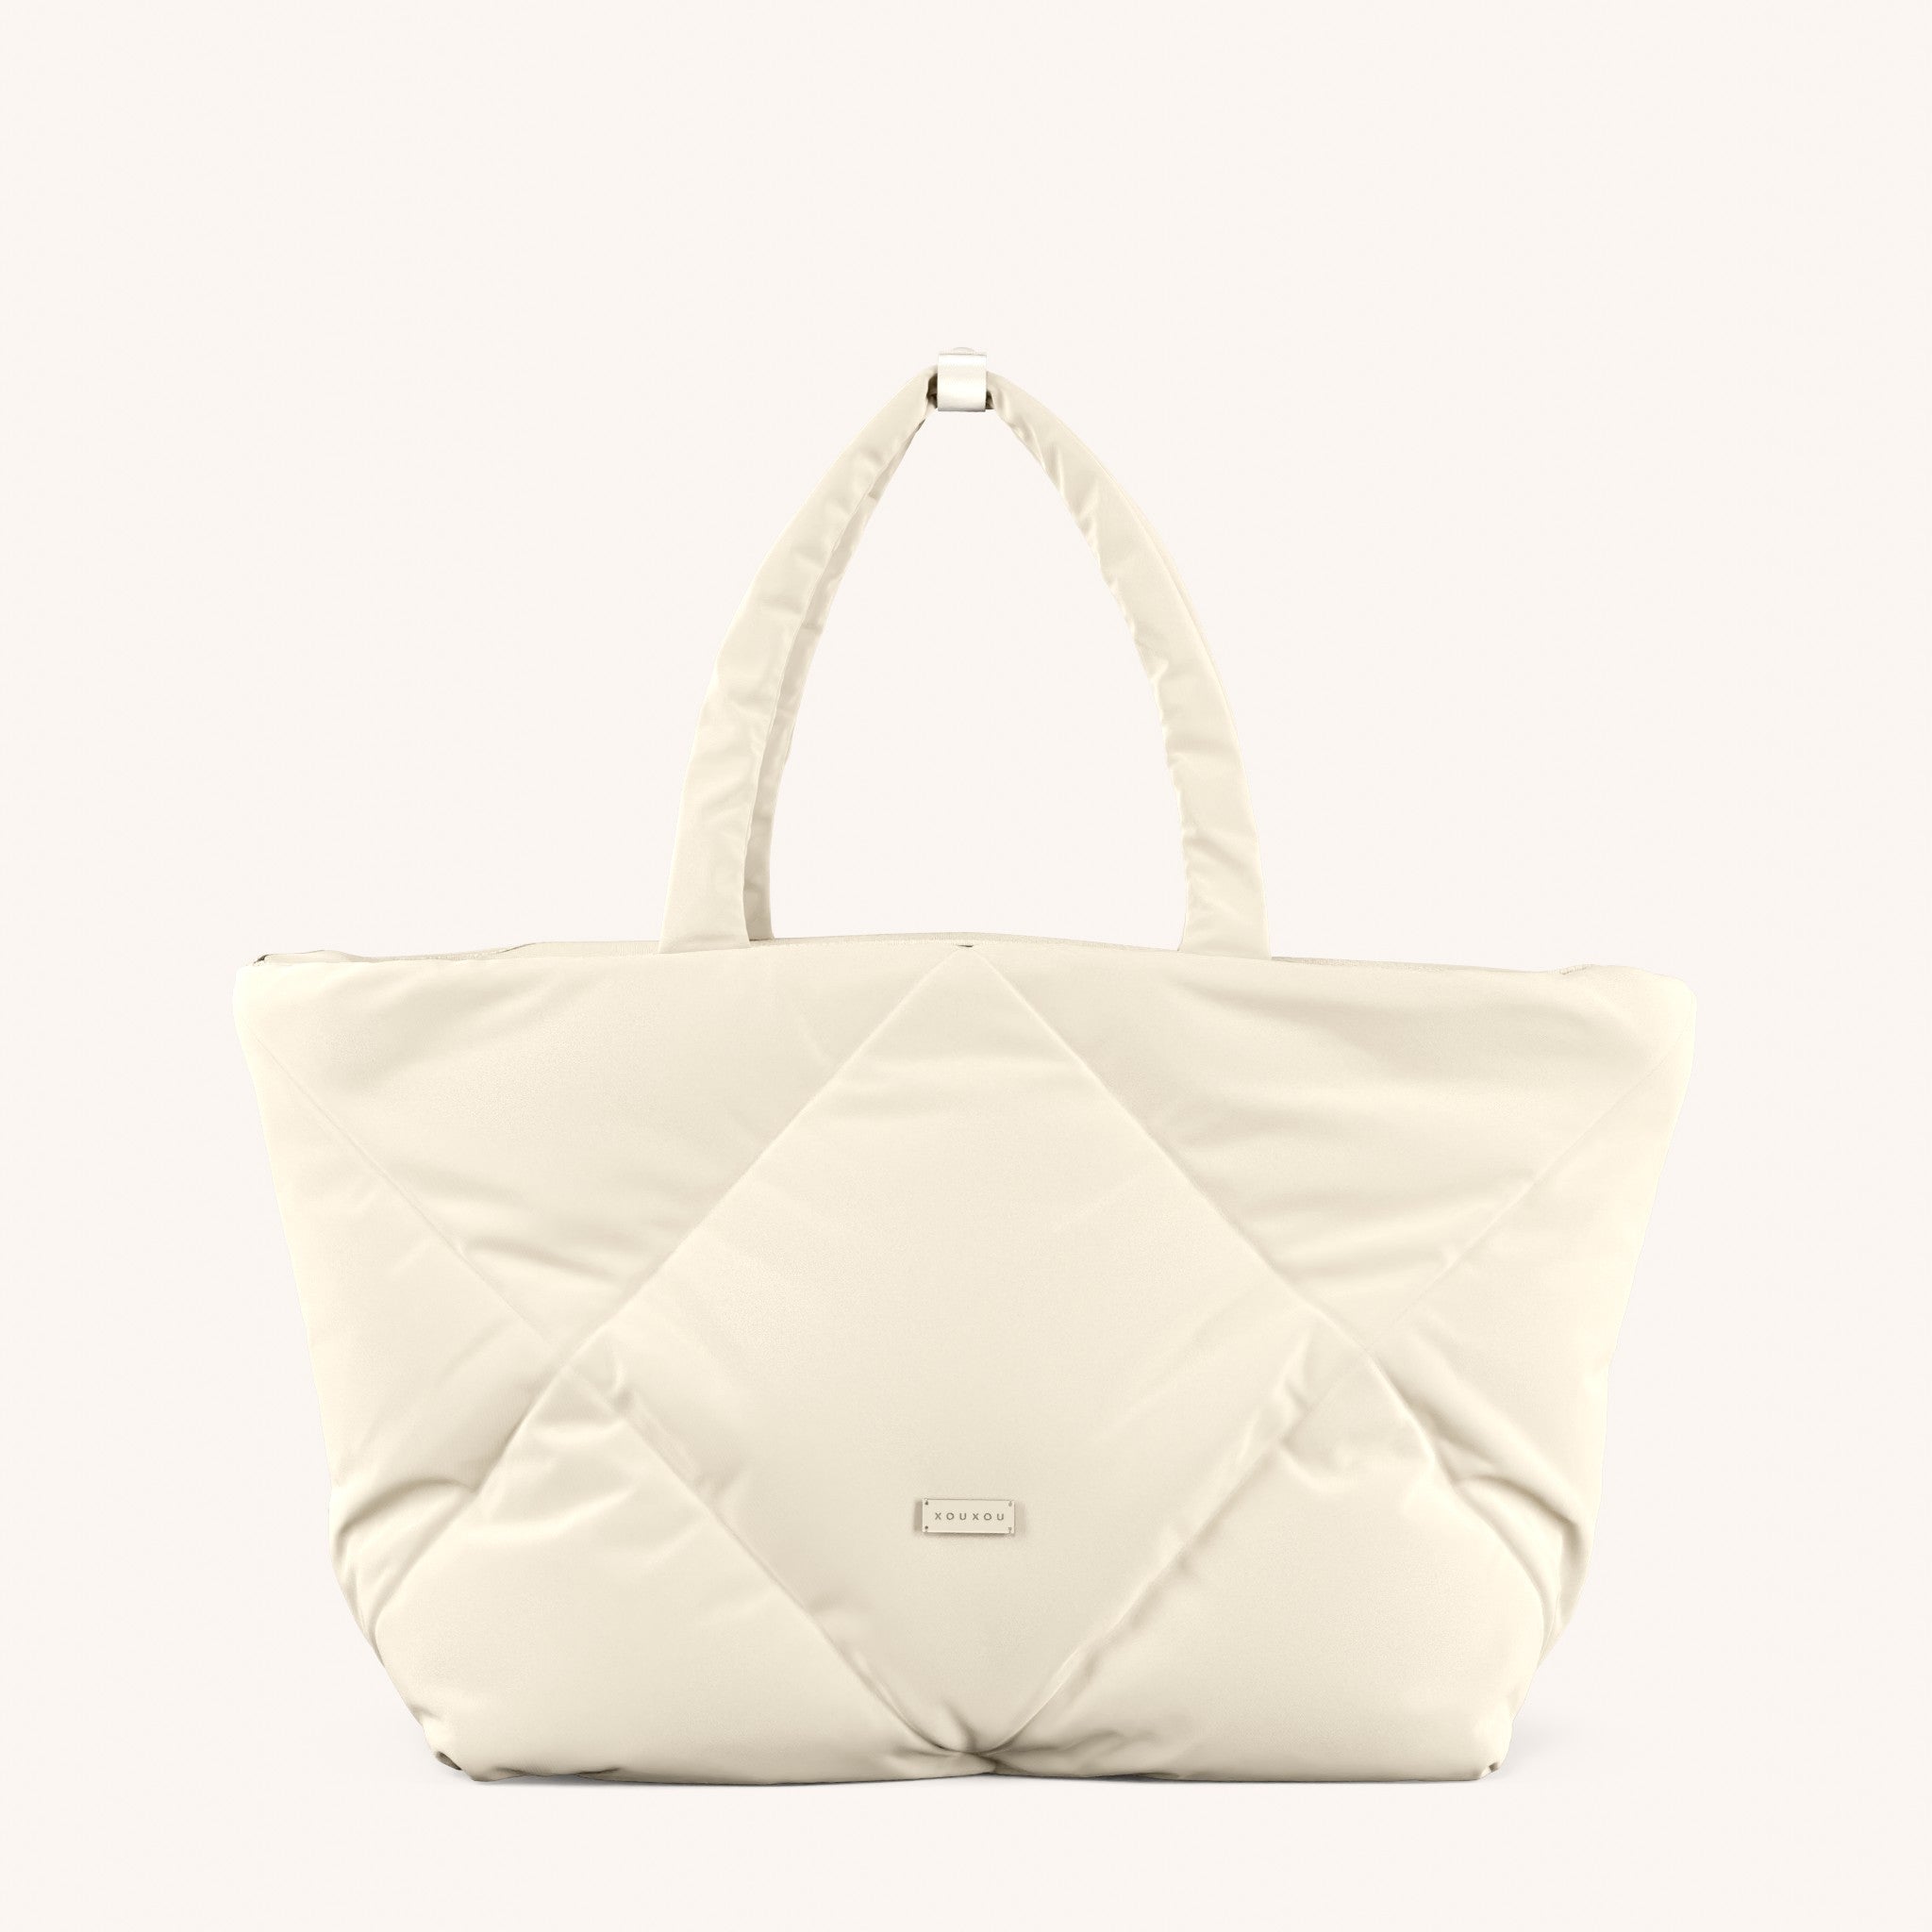 Padded Tote in Chalk Total View | XOUXOU